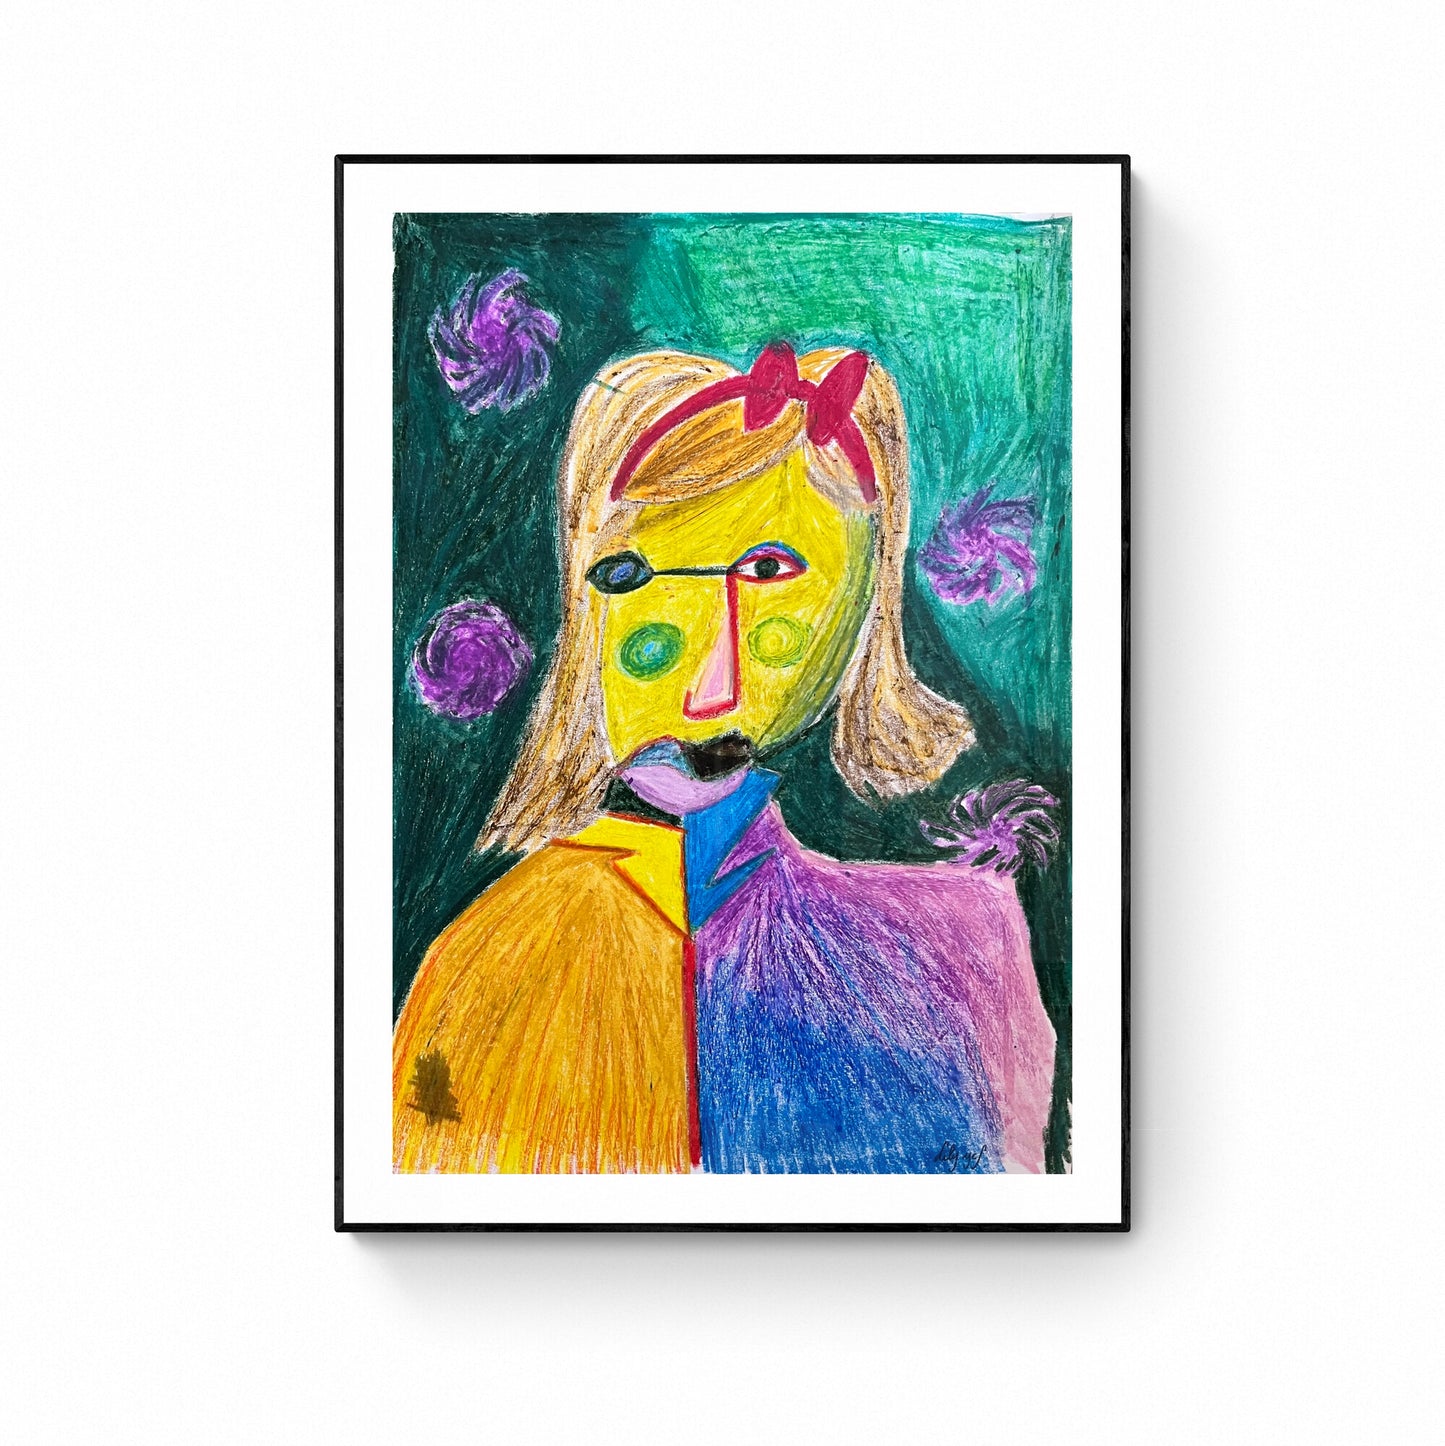 Lily ycf. F2.3 - Unique pastel on Art Paper - Exclusively on LYNART Store